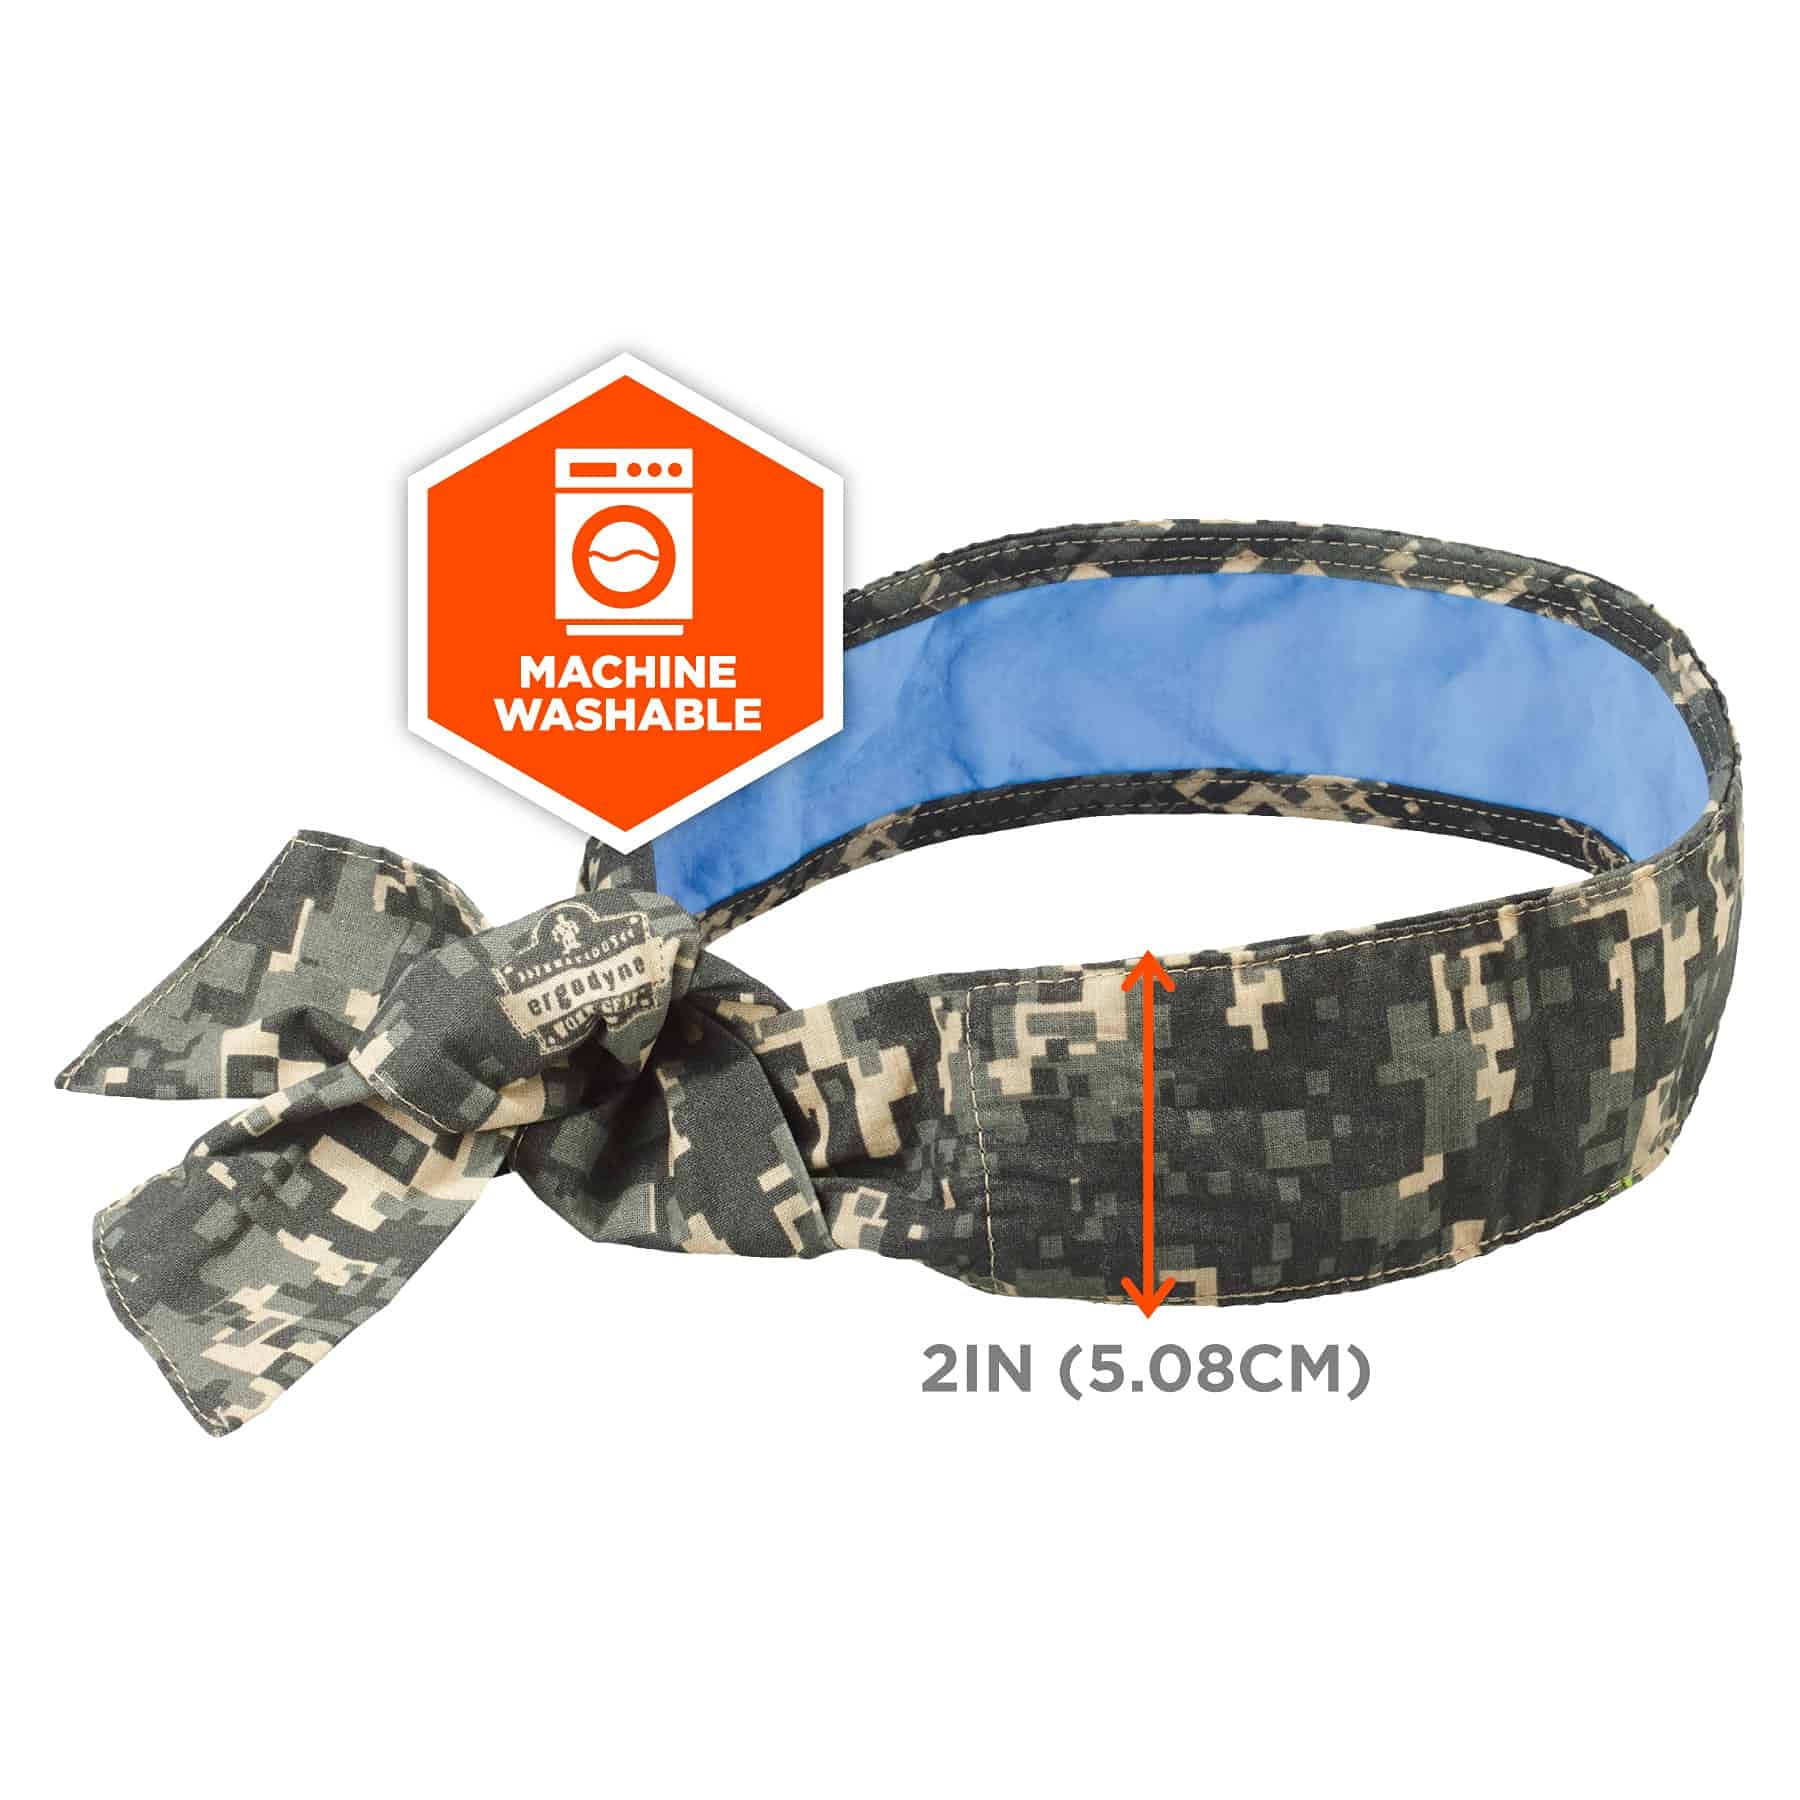 Ergodyne Chill Its 6700CT Cooling Bandana, Lined with Evaporative PVA Material for Fast Cooling Relief, Tie for Adjustable Fit, Camo (12562)